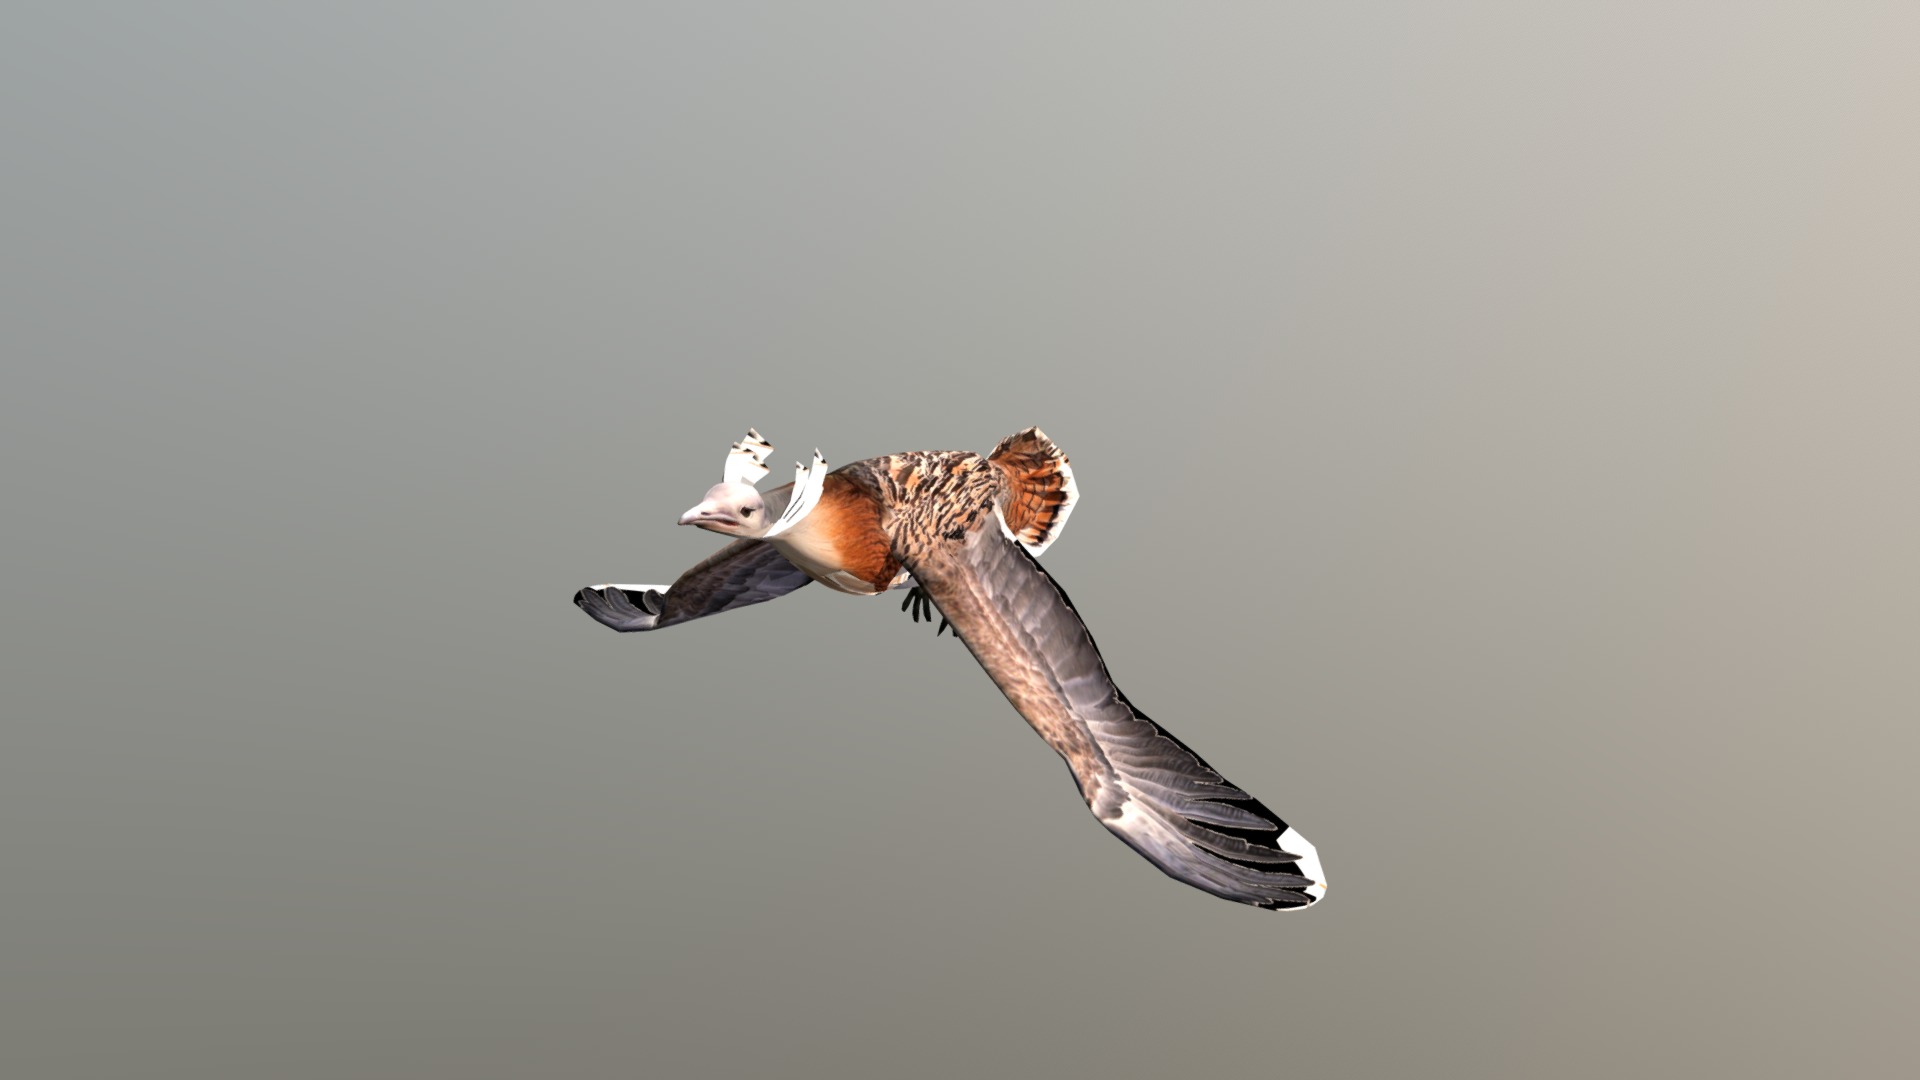 3D model African animals – Drofa - This is a 3D model of the African animals - Drofa. The 3D model is about a bird flying in the sky.